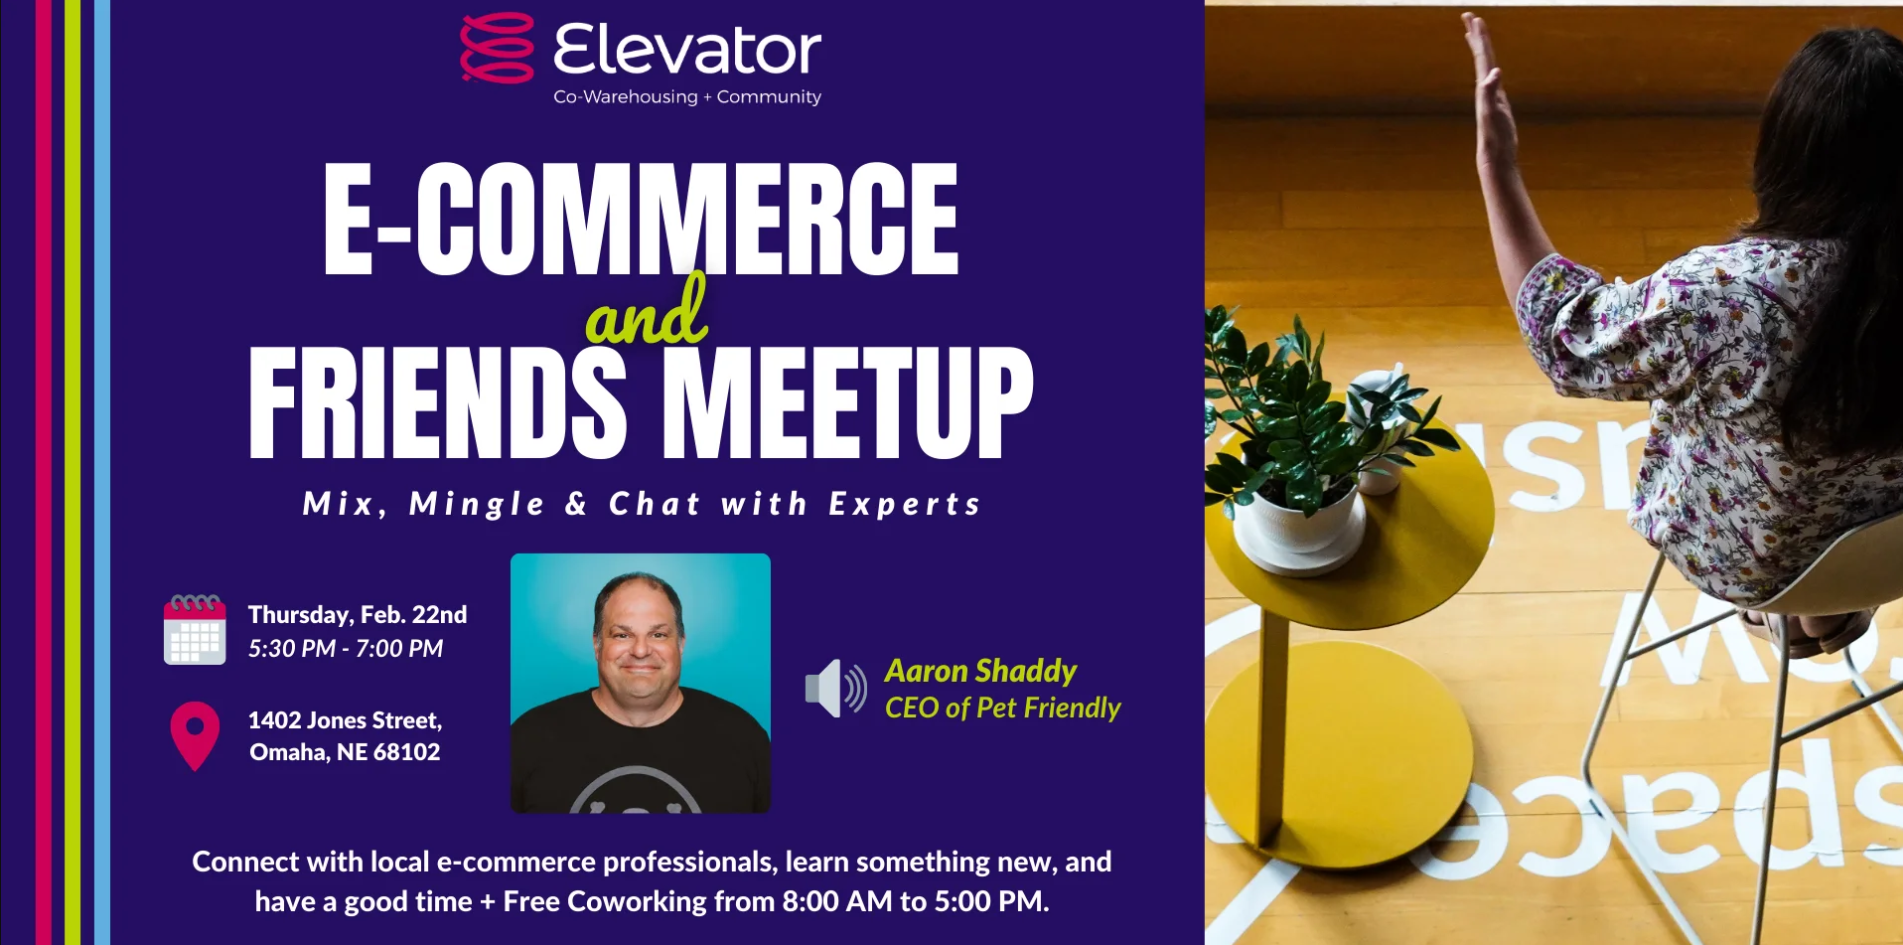 E-Commerce & Friends Meetup with Aaron Shaddy, CEO of Pet Friendly